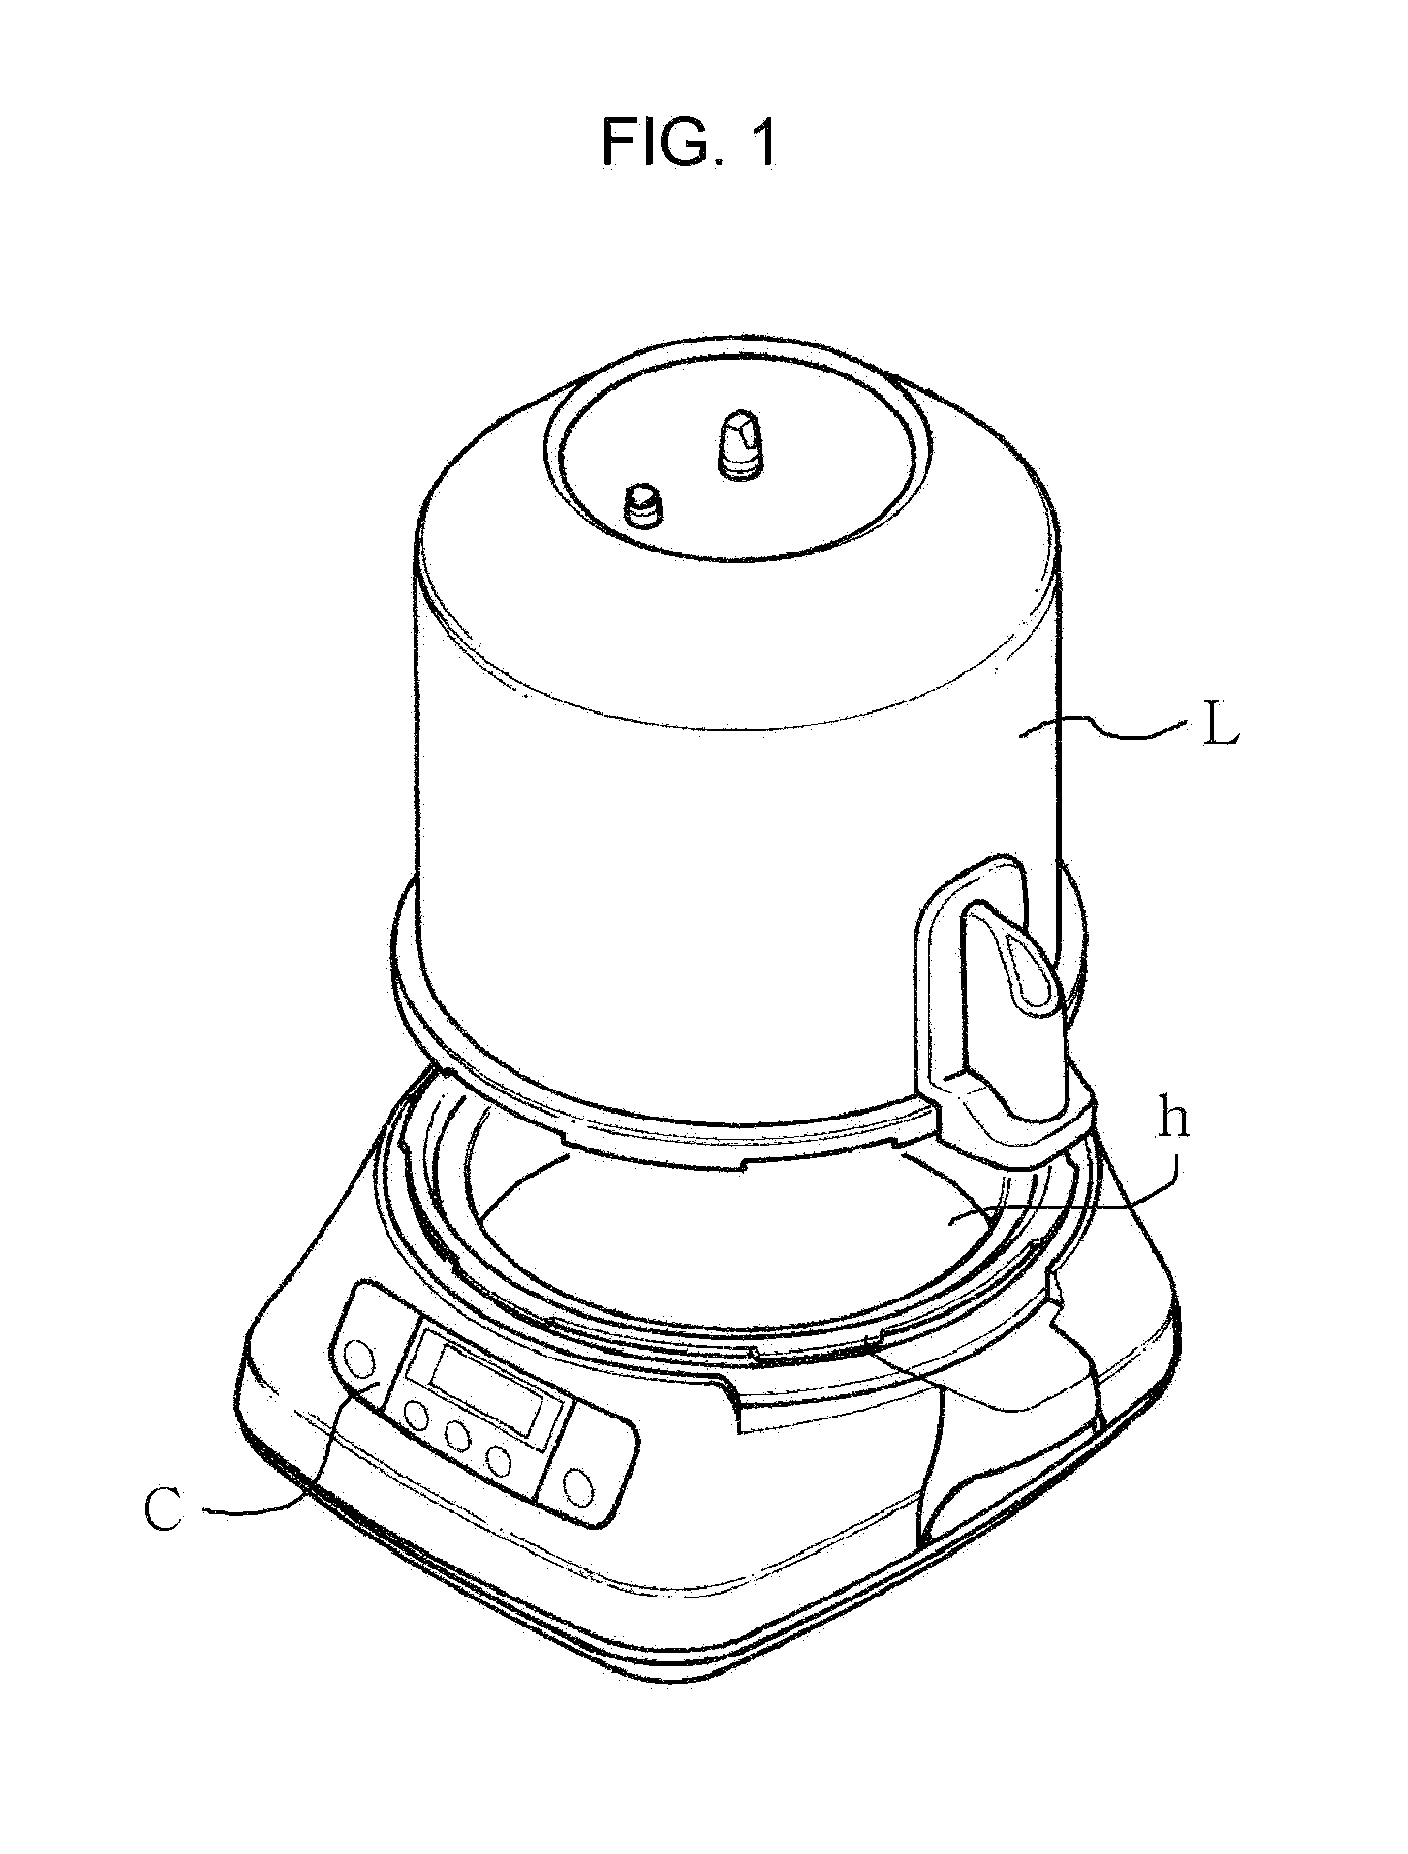 Cooking method using an automatic pressure double boiler